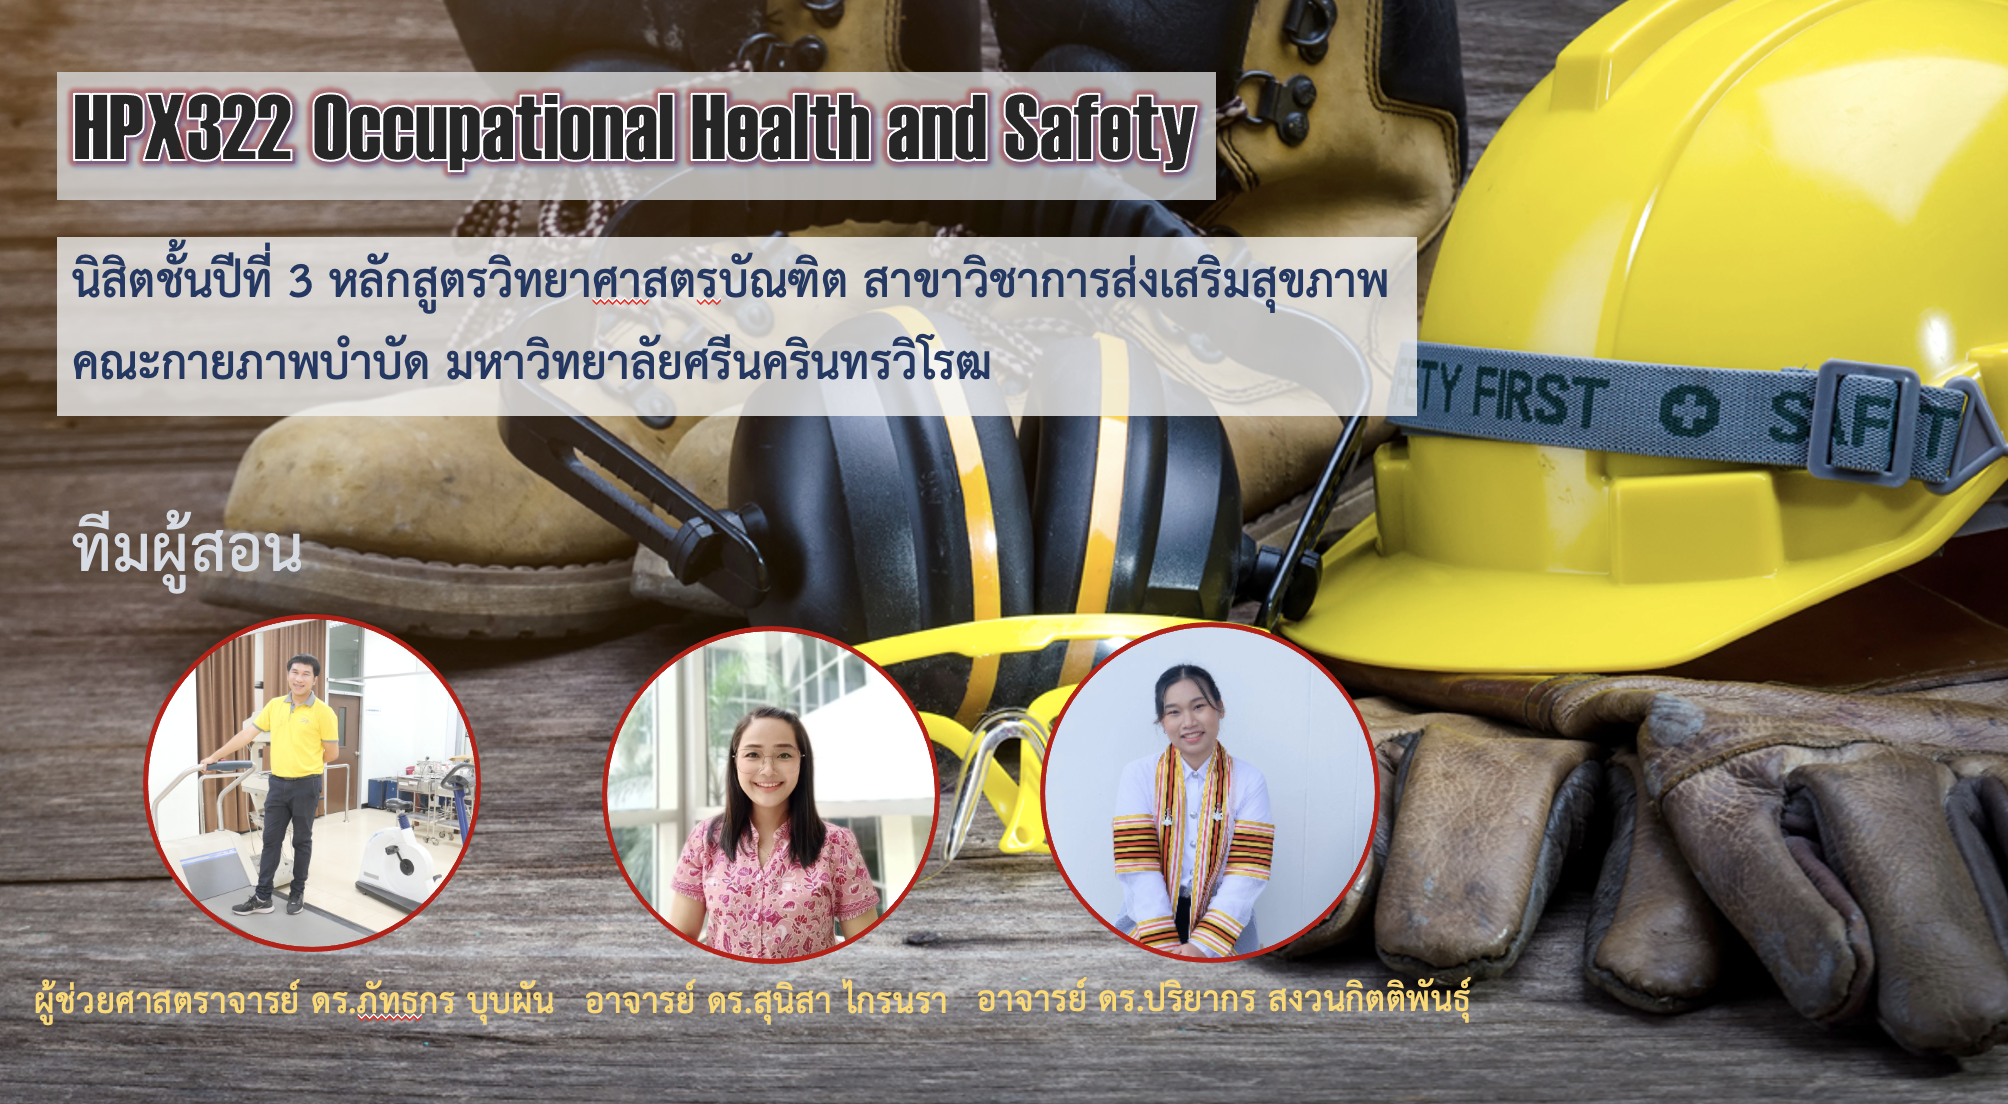 HPX322 Occupational Health and Safety 1/2565